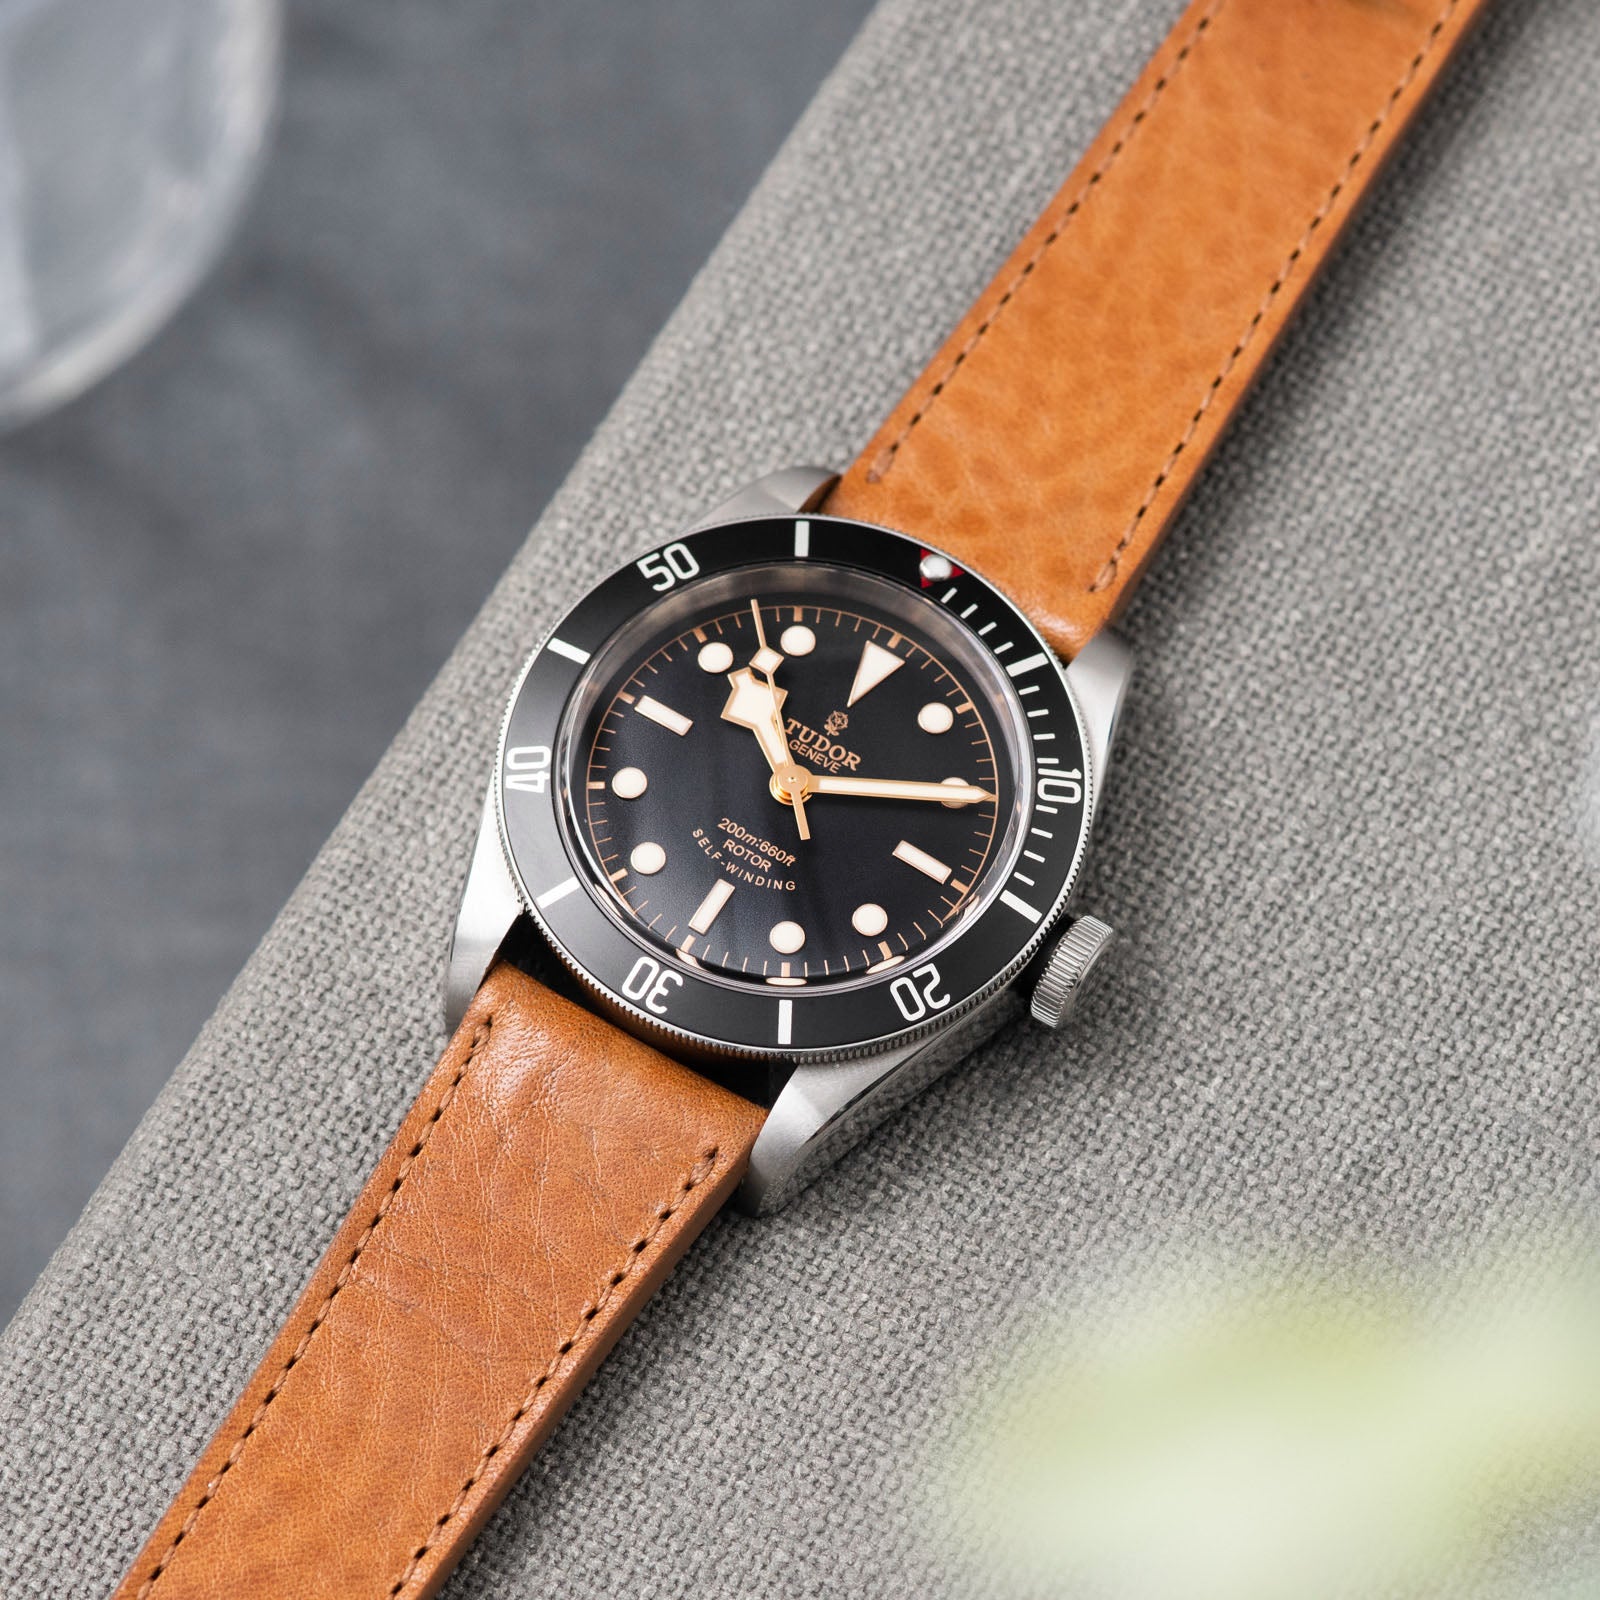 Bulang and Sons_Strap Guide_The Tudor Black Bay Black 79220N_Gilt Brown Tonal Leather Watch Strap